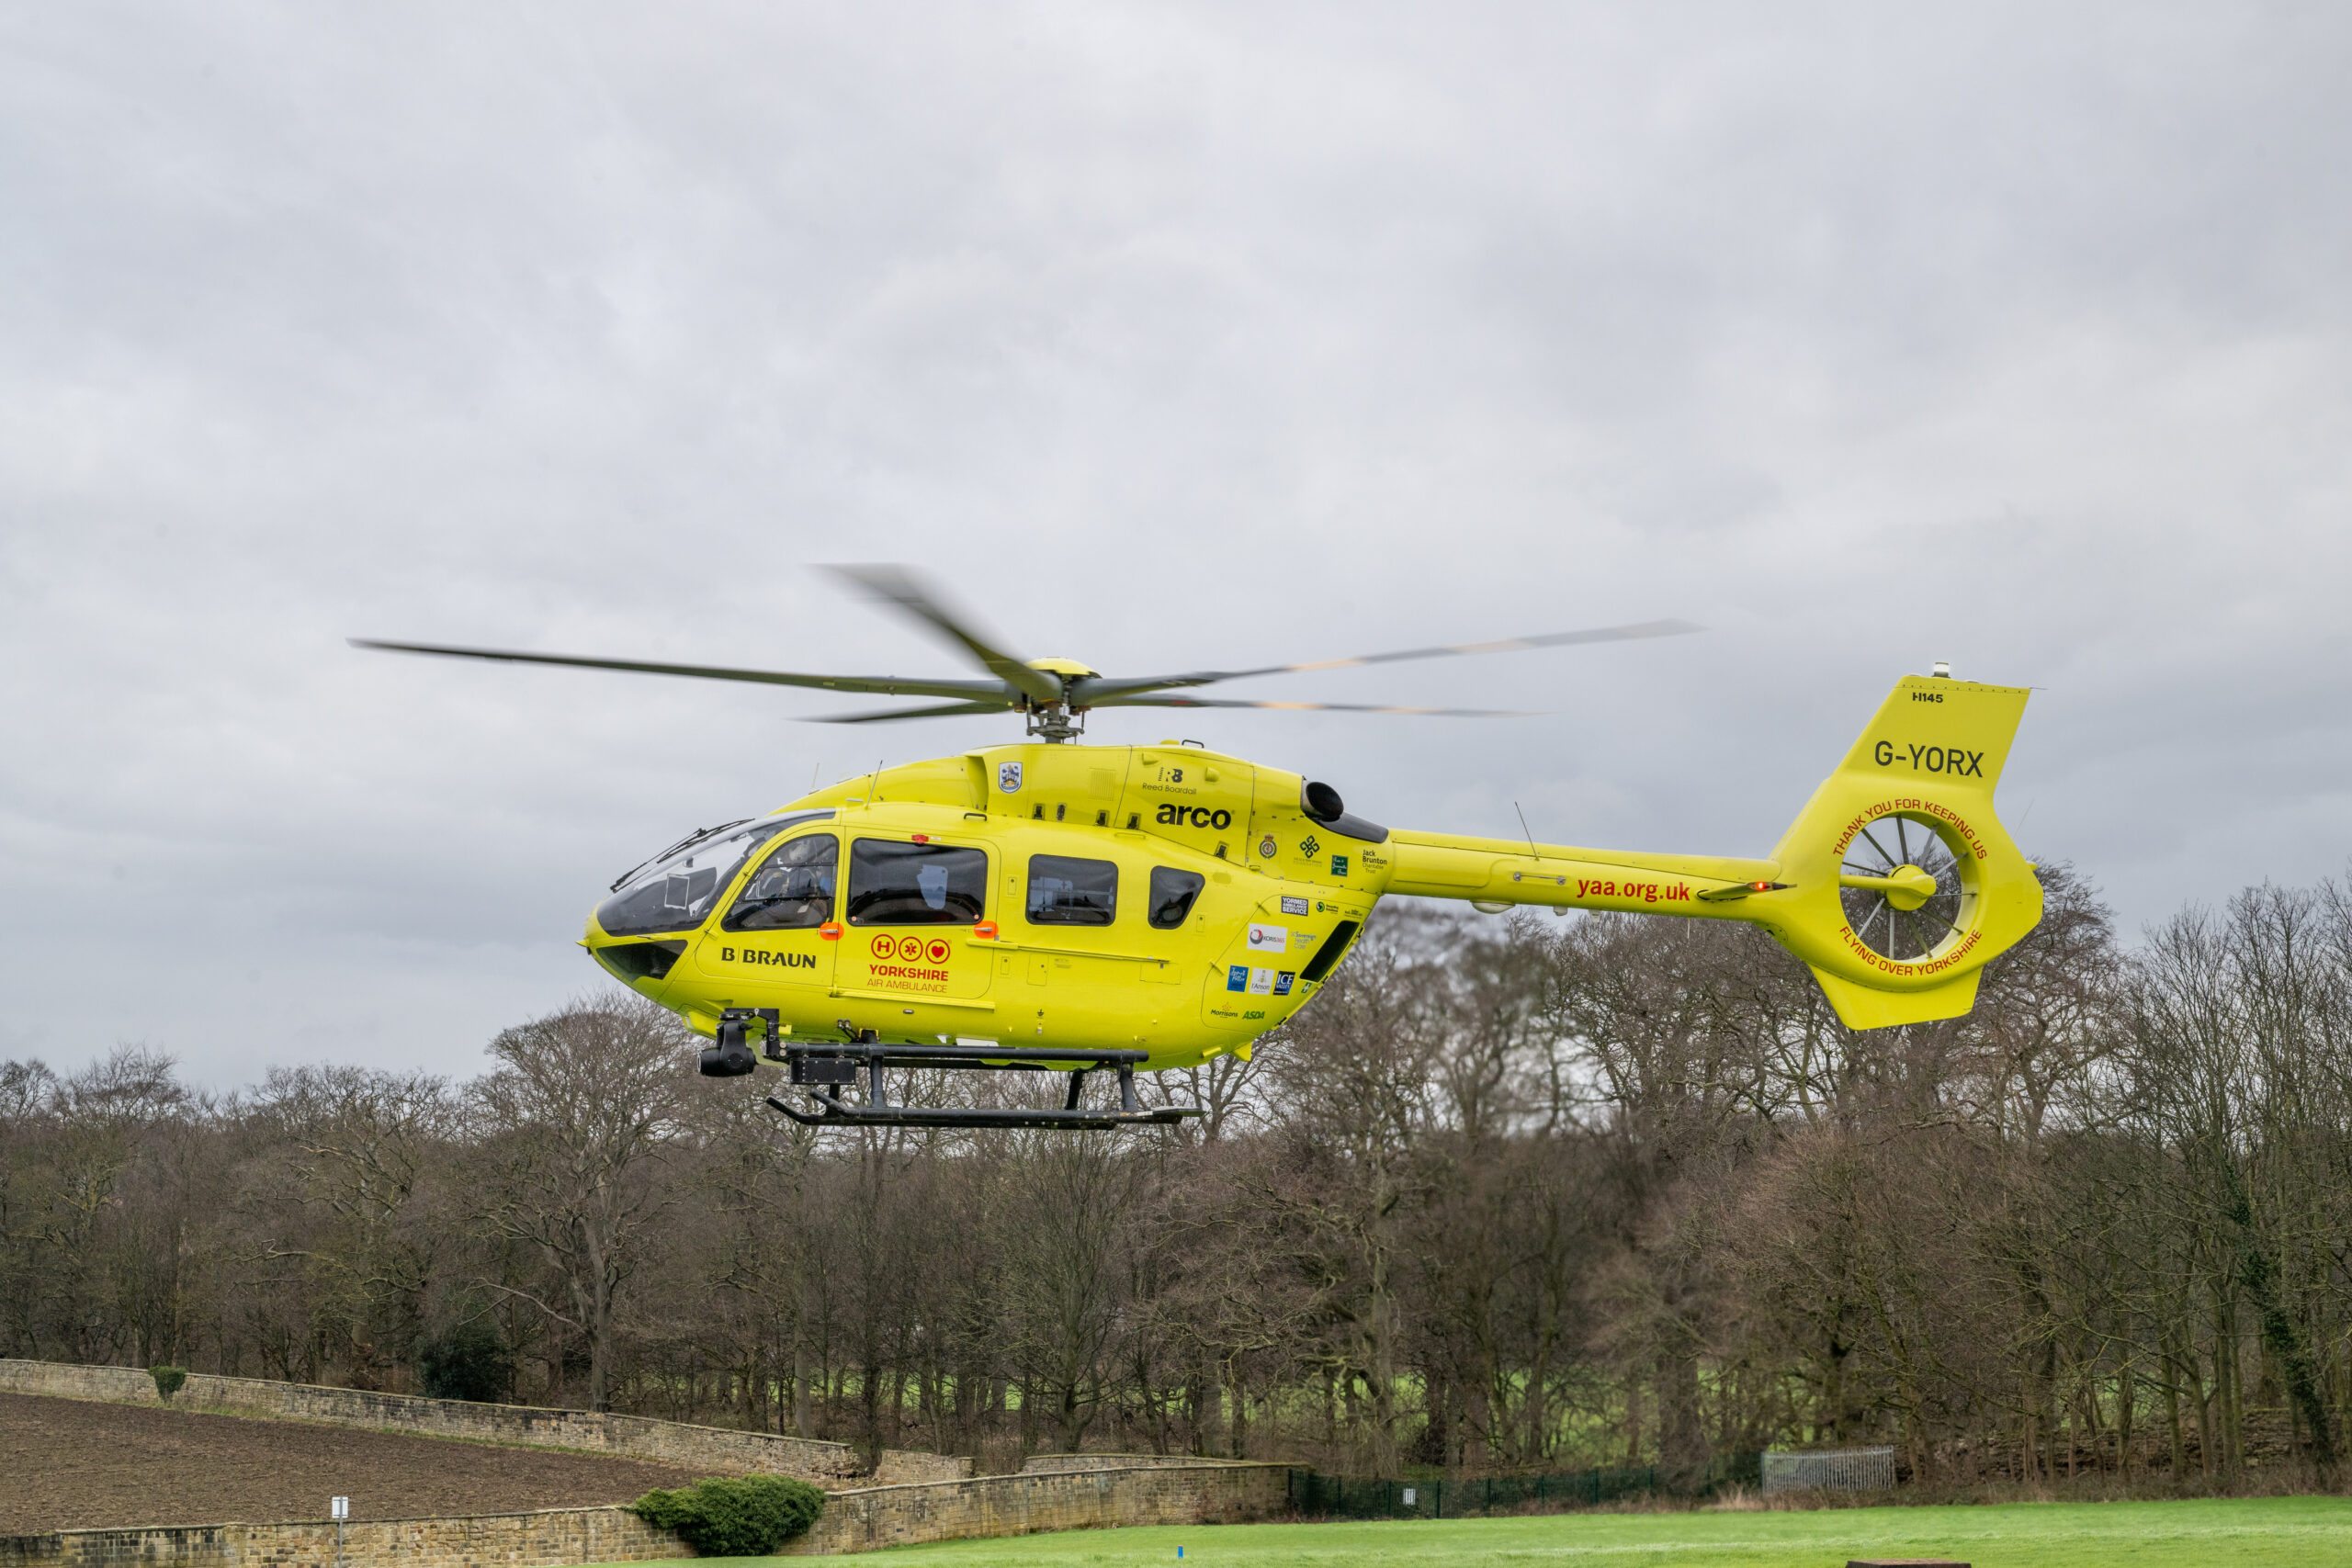 A yellow helicopter is flying above a field with trees in the background.